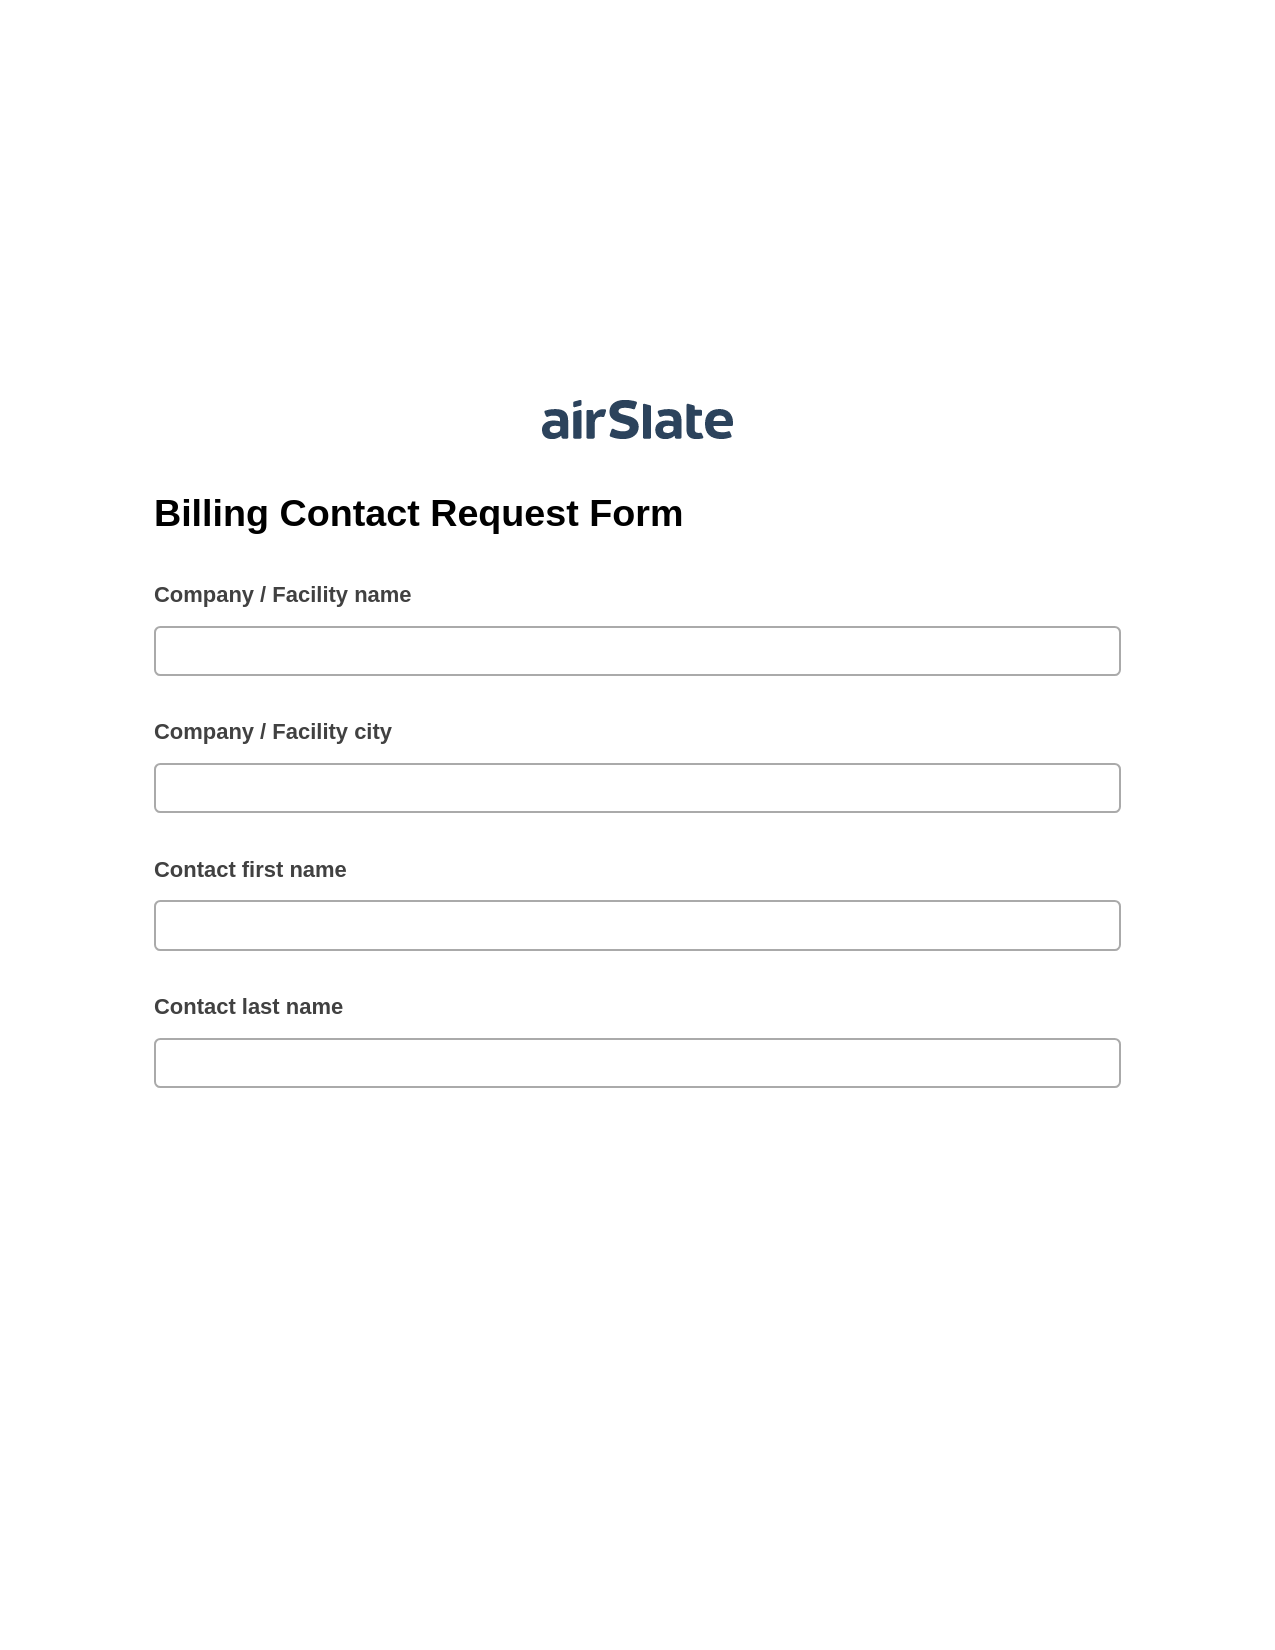 Multirole Billing Contact Request Form Pre-fill Dropdowns from Google Sheet Bot, SendGrid send Campaign bot, Post-finish Document Bot